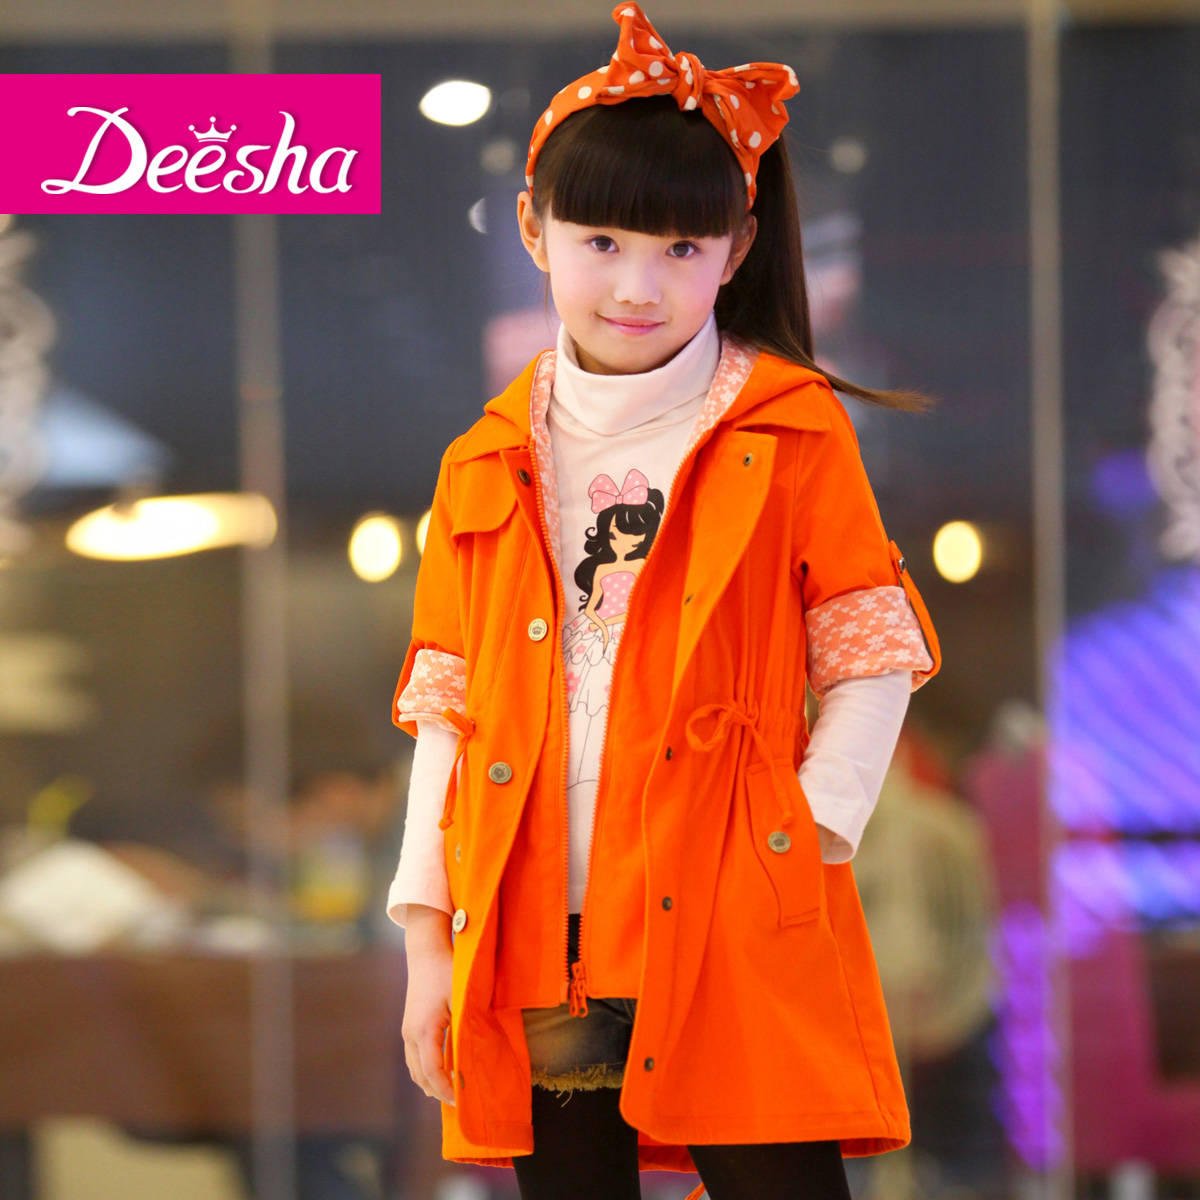 DEESHA spring new arrival girls clothing child long design child long-sleeve outerwear 1312012